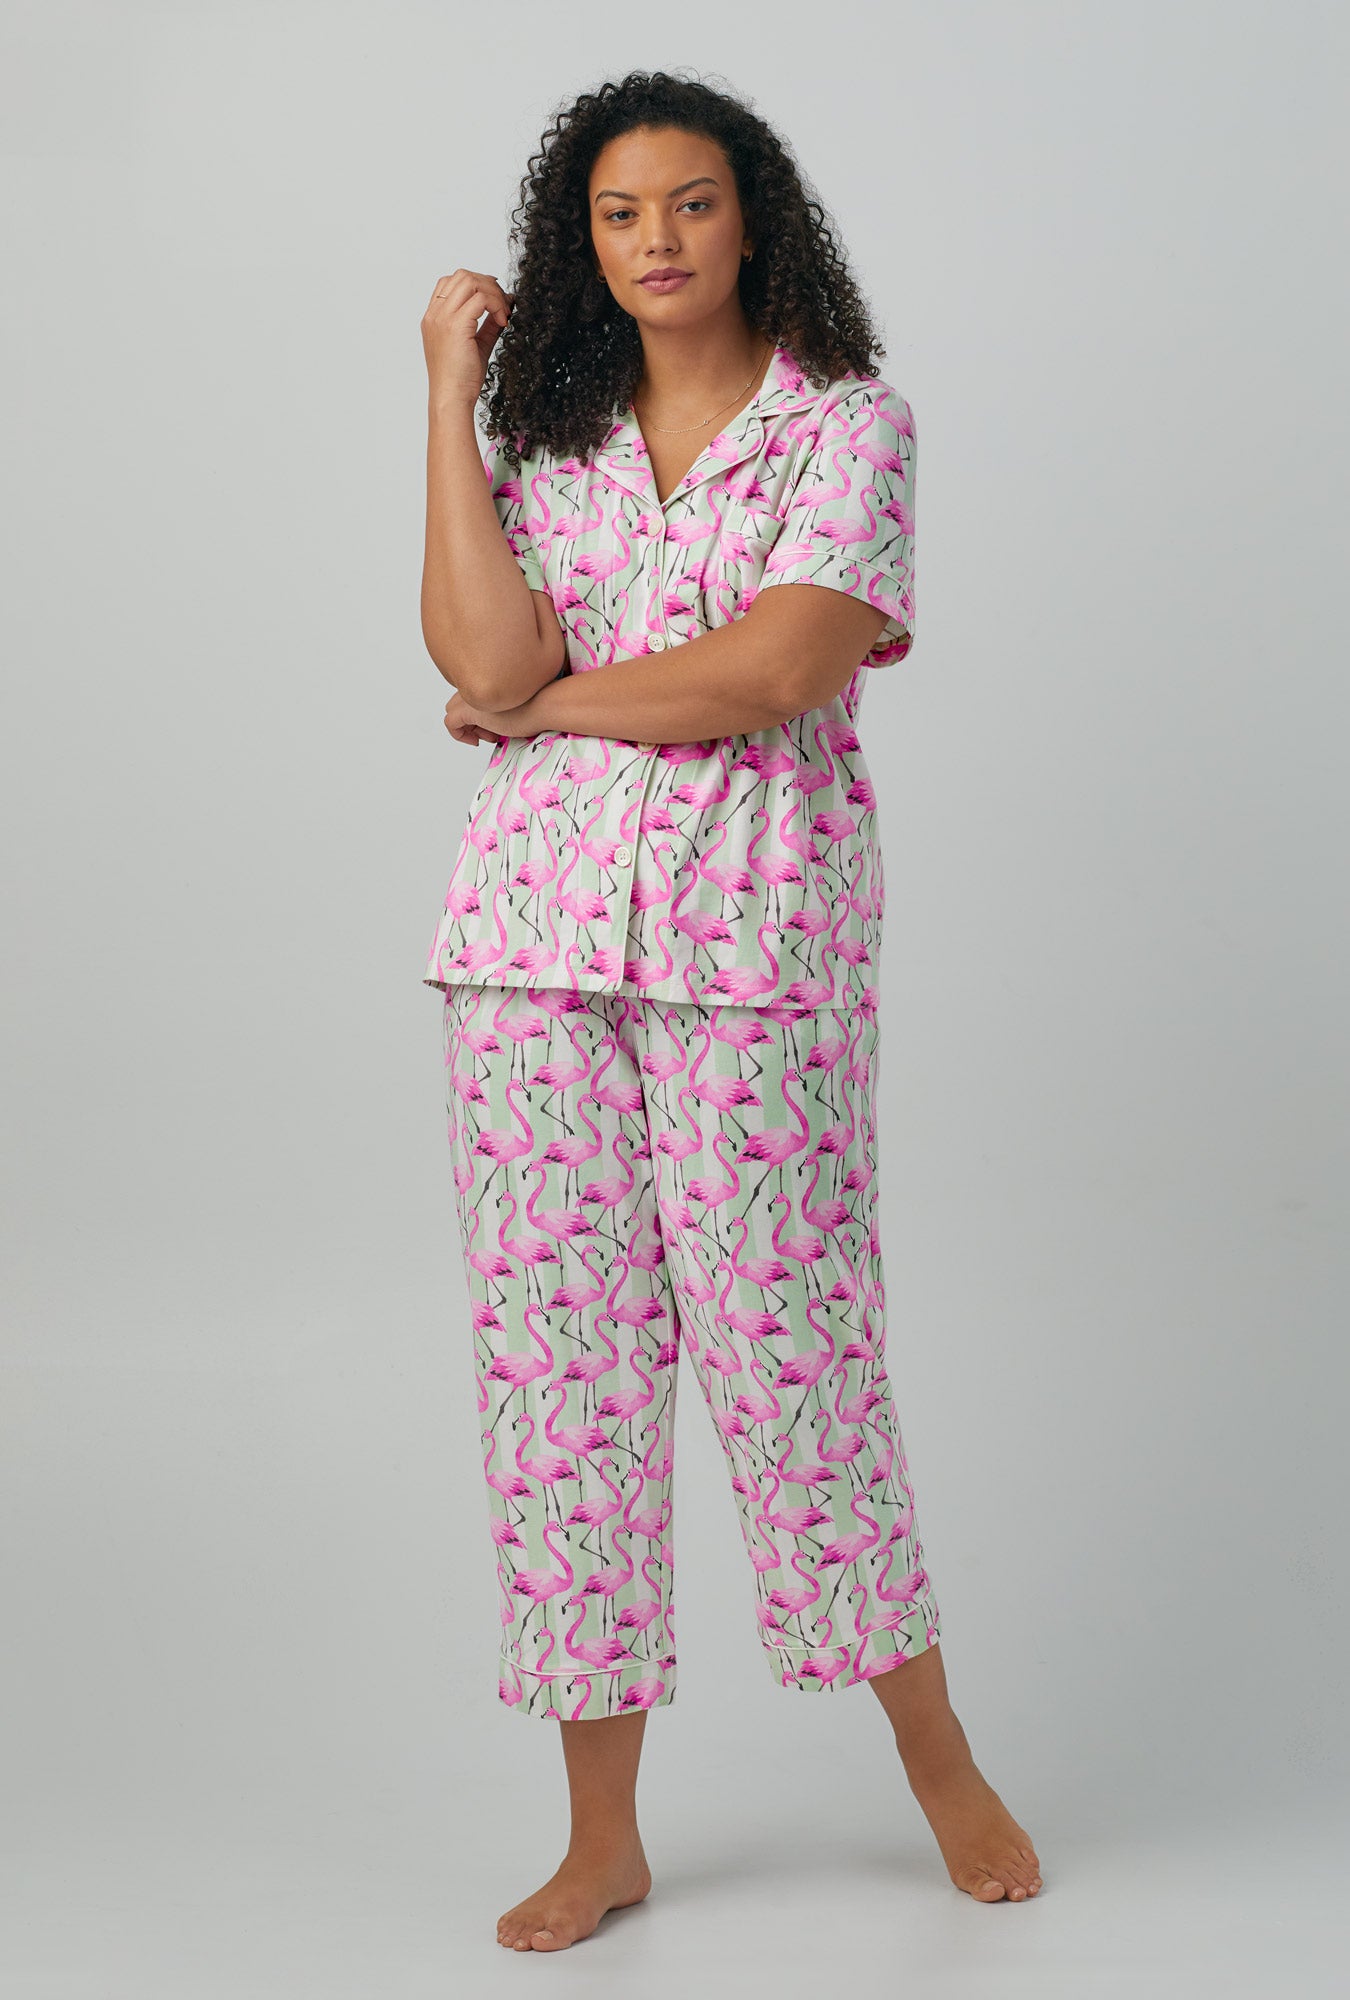 A lady wearing pink Short Sleeve Classic Stretch Jersey Cropped PJ Set with Flamingo Bay print